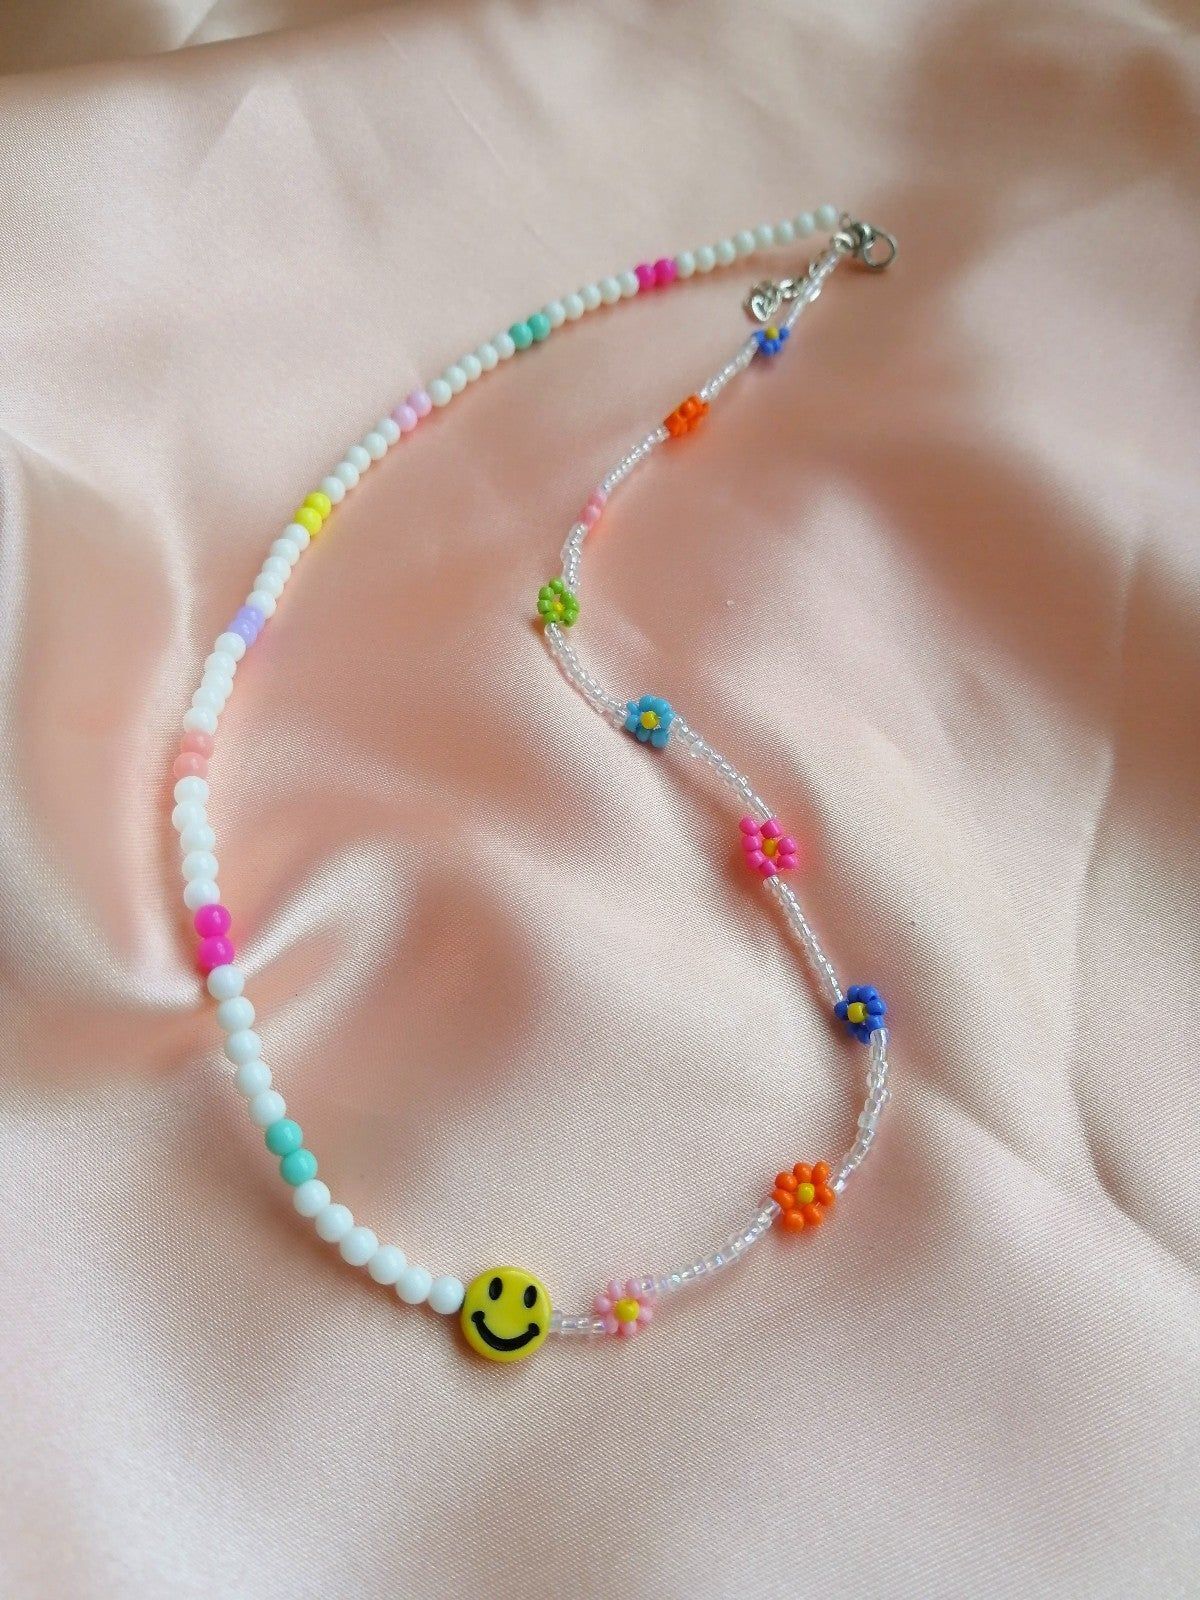 How to make a beaded necklace?